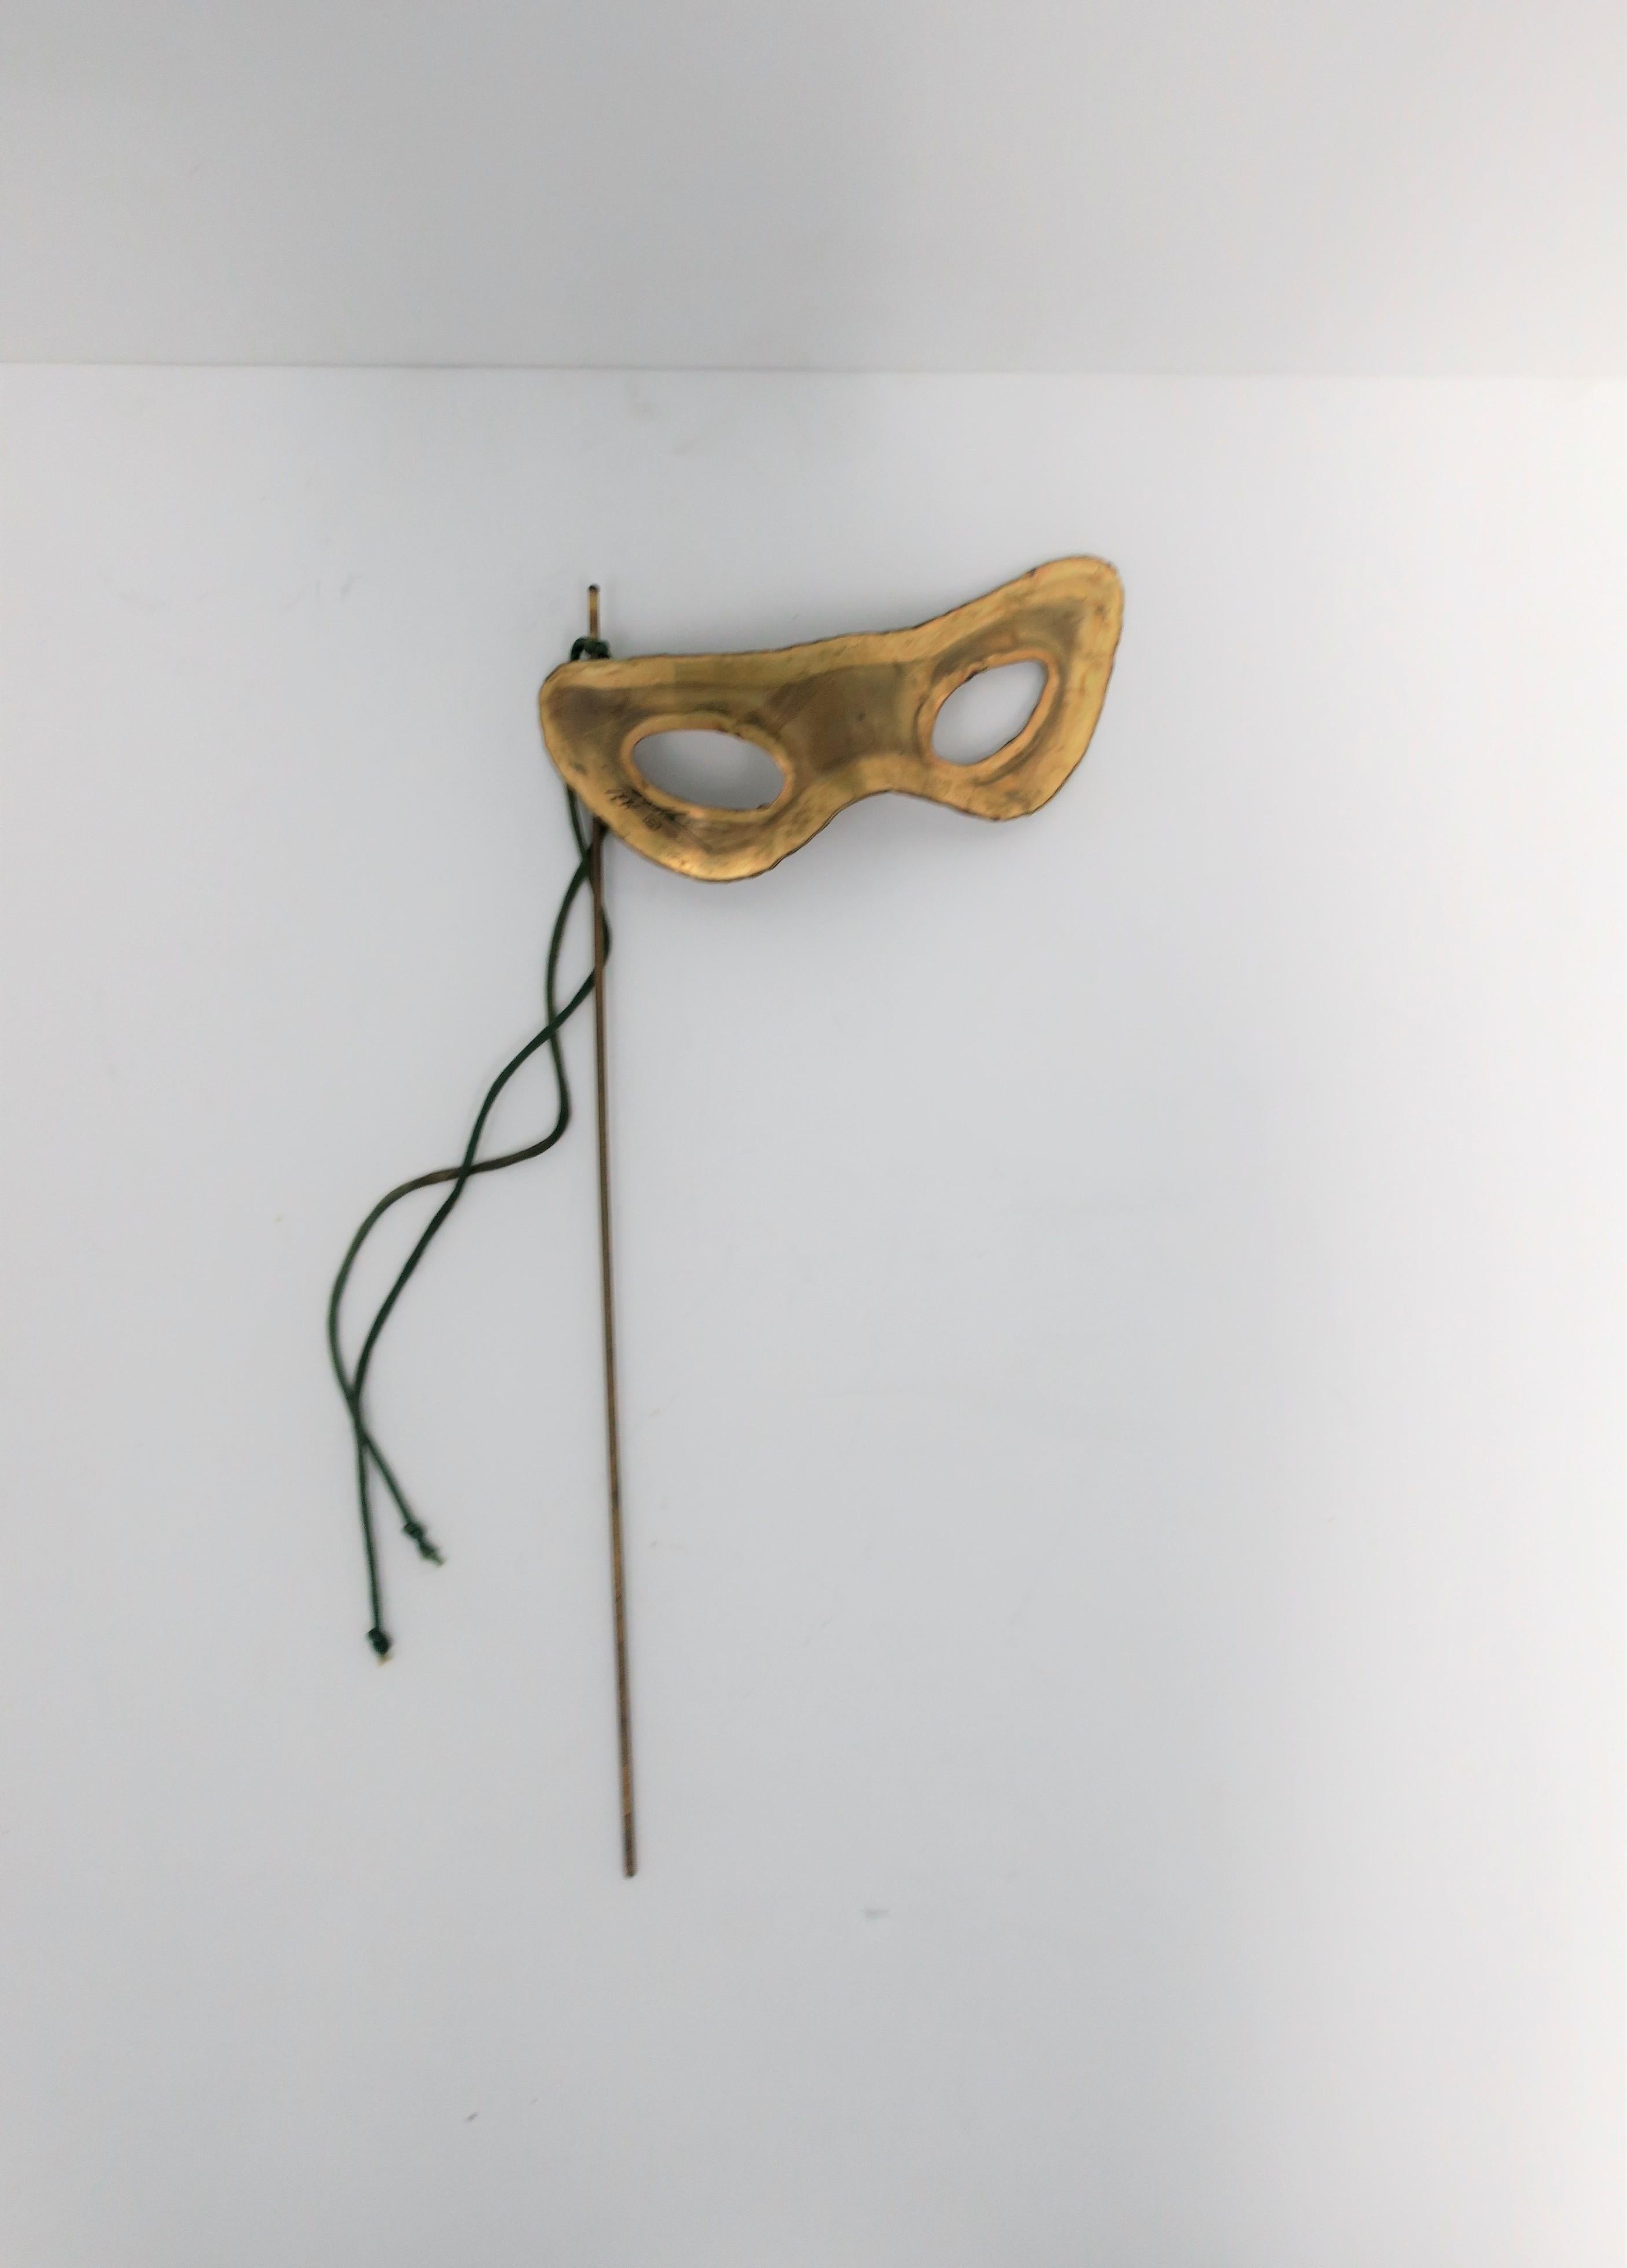 A unique late 20th century hand-held signed and dated designer brass Masquerade mask, circa 1990s. Signed 